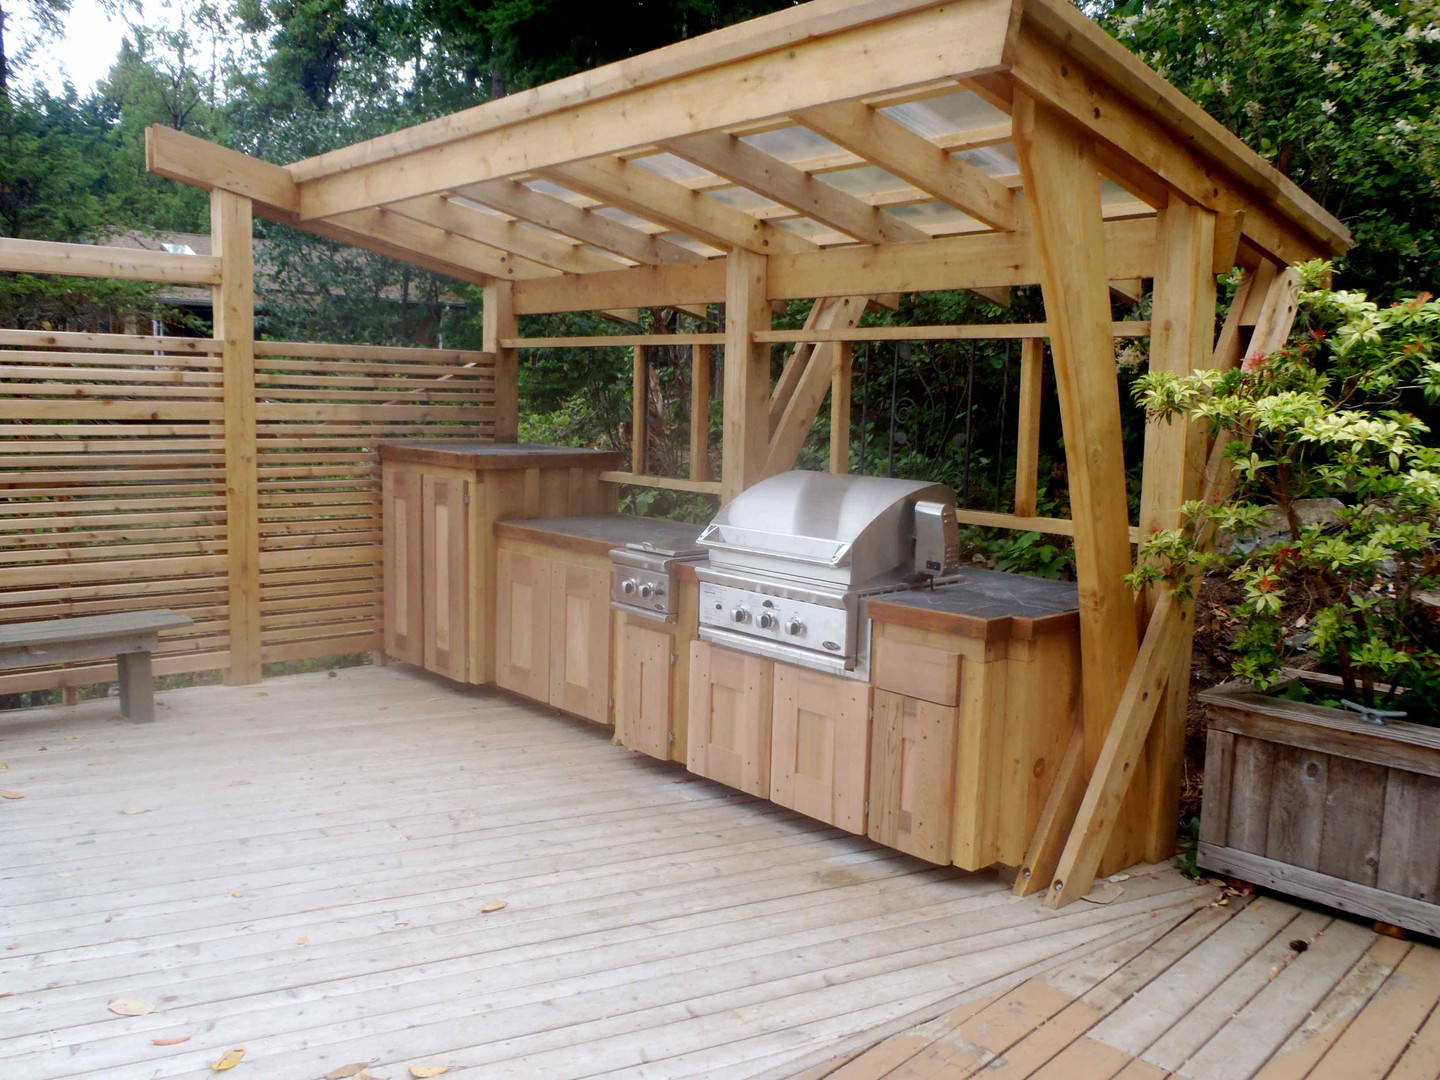 Diy Outdoor Kitchen
 These DIY Outdoor Kitchen Plans Turn Your Backyard Into